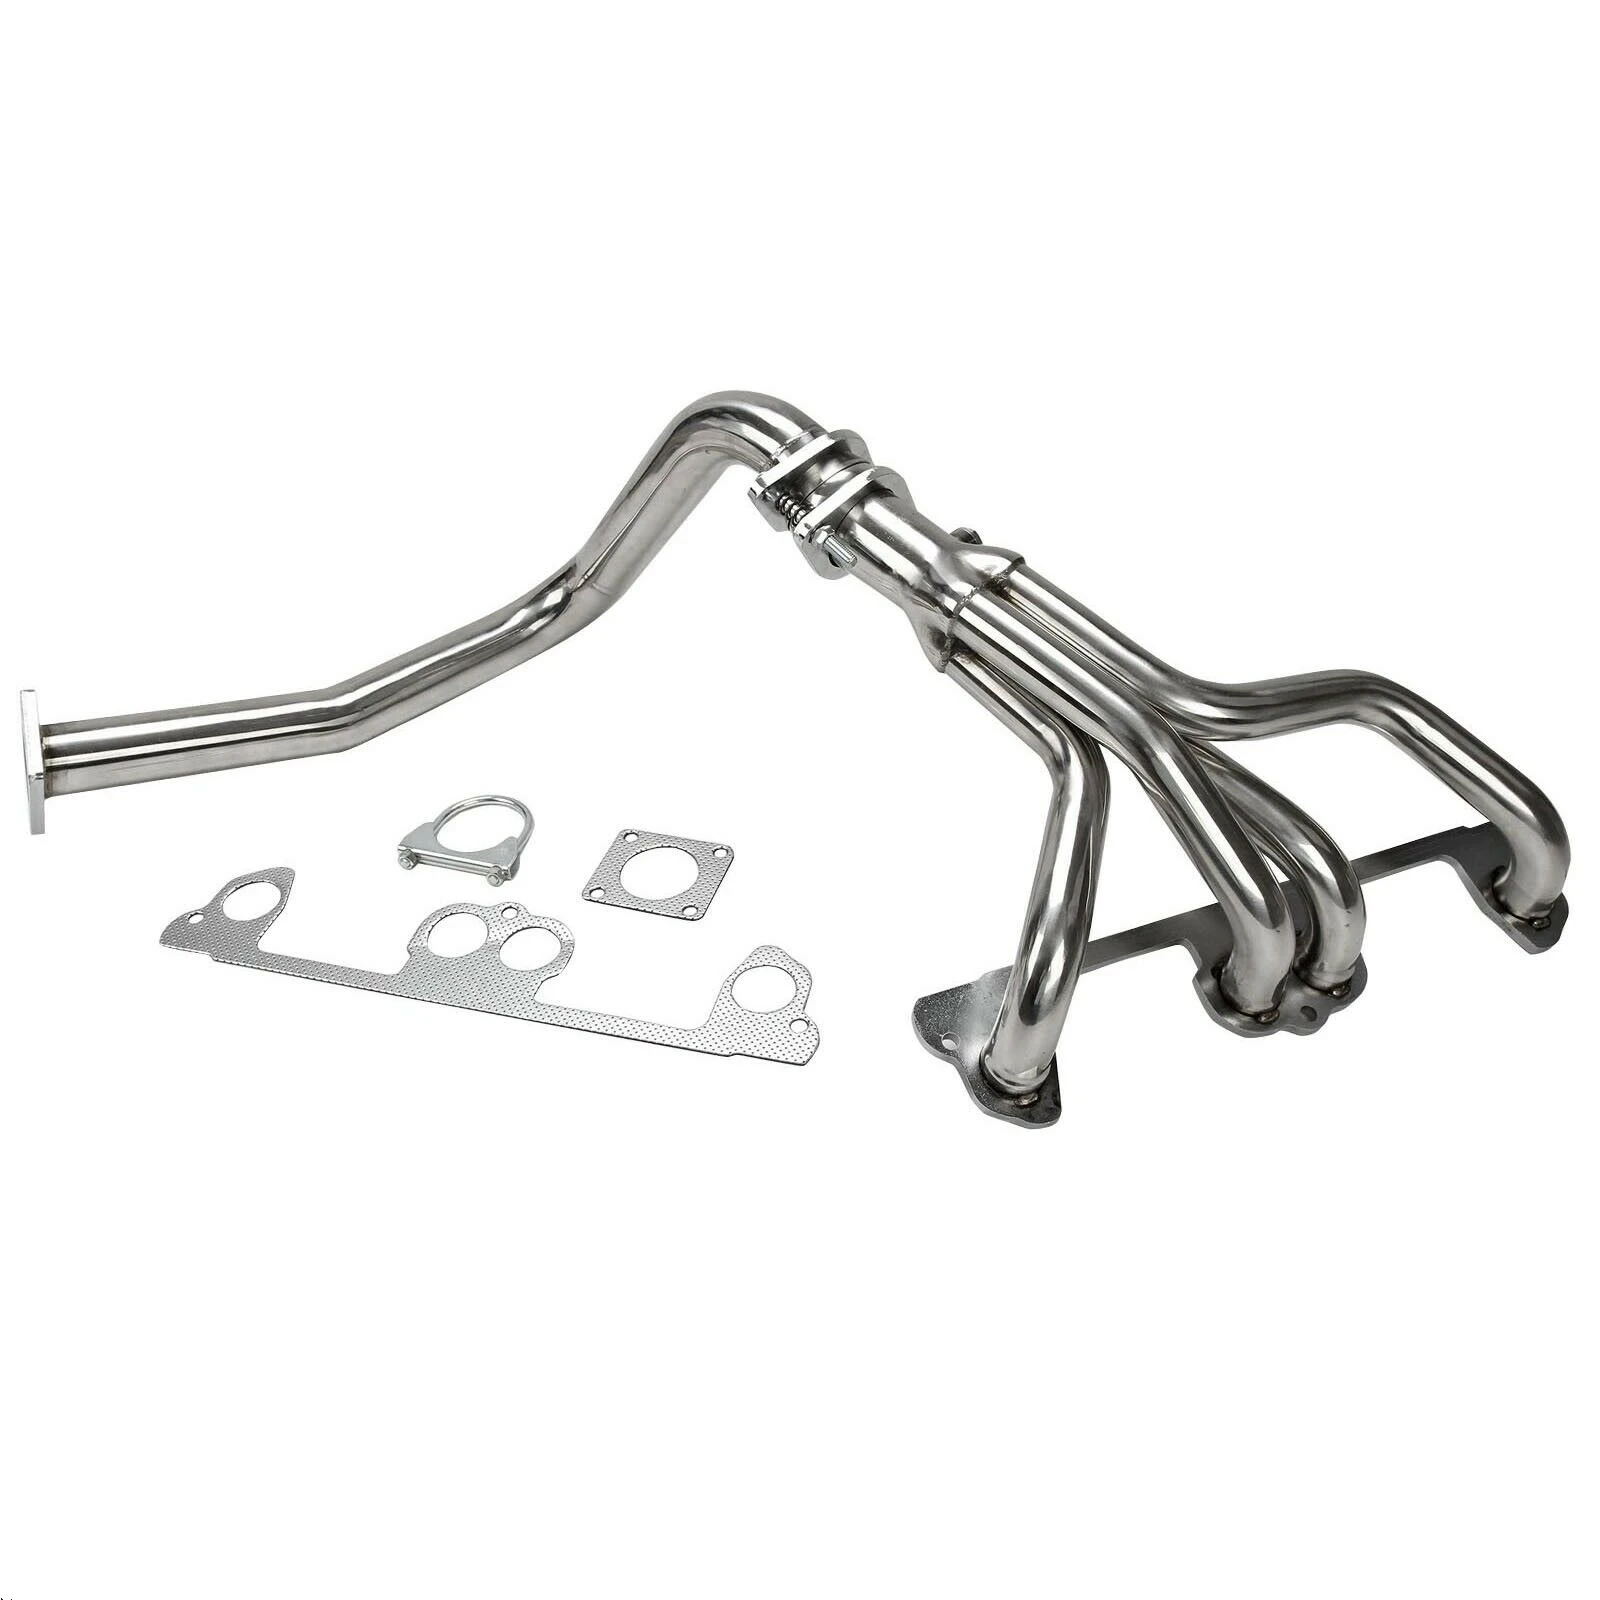 Exhaust Manifold Headers for 1991 1995 Jeep Wrangler YJ  L4| | -  AliExpress